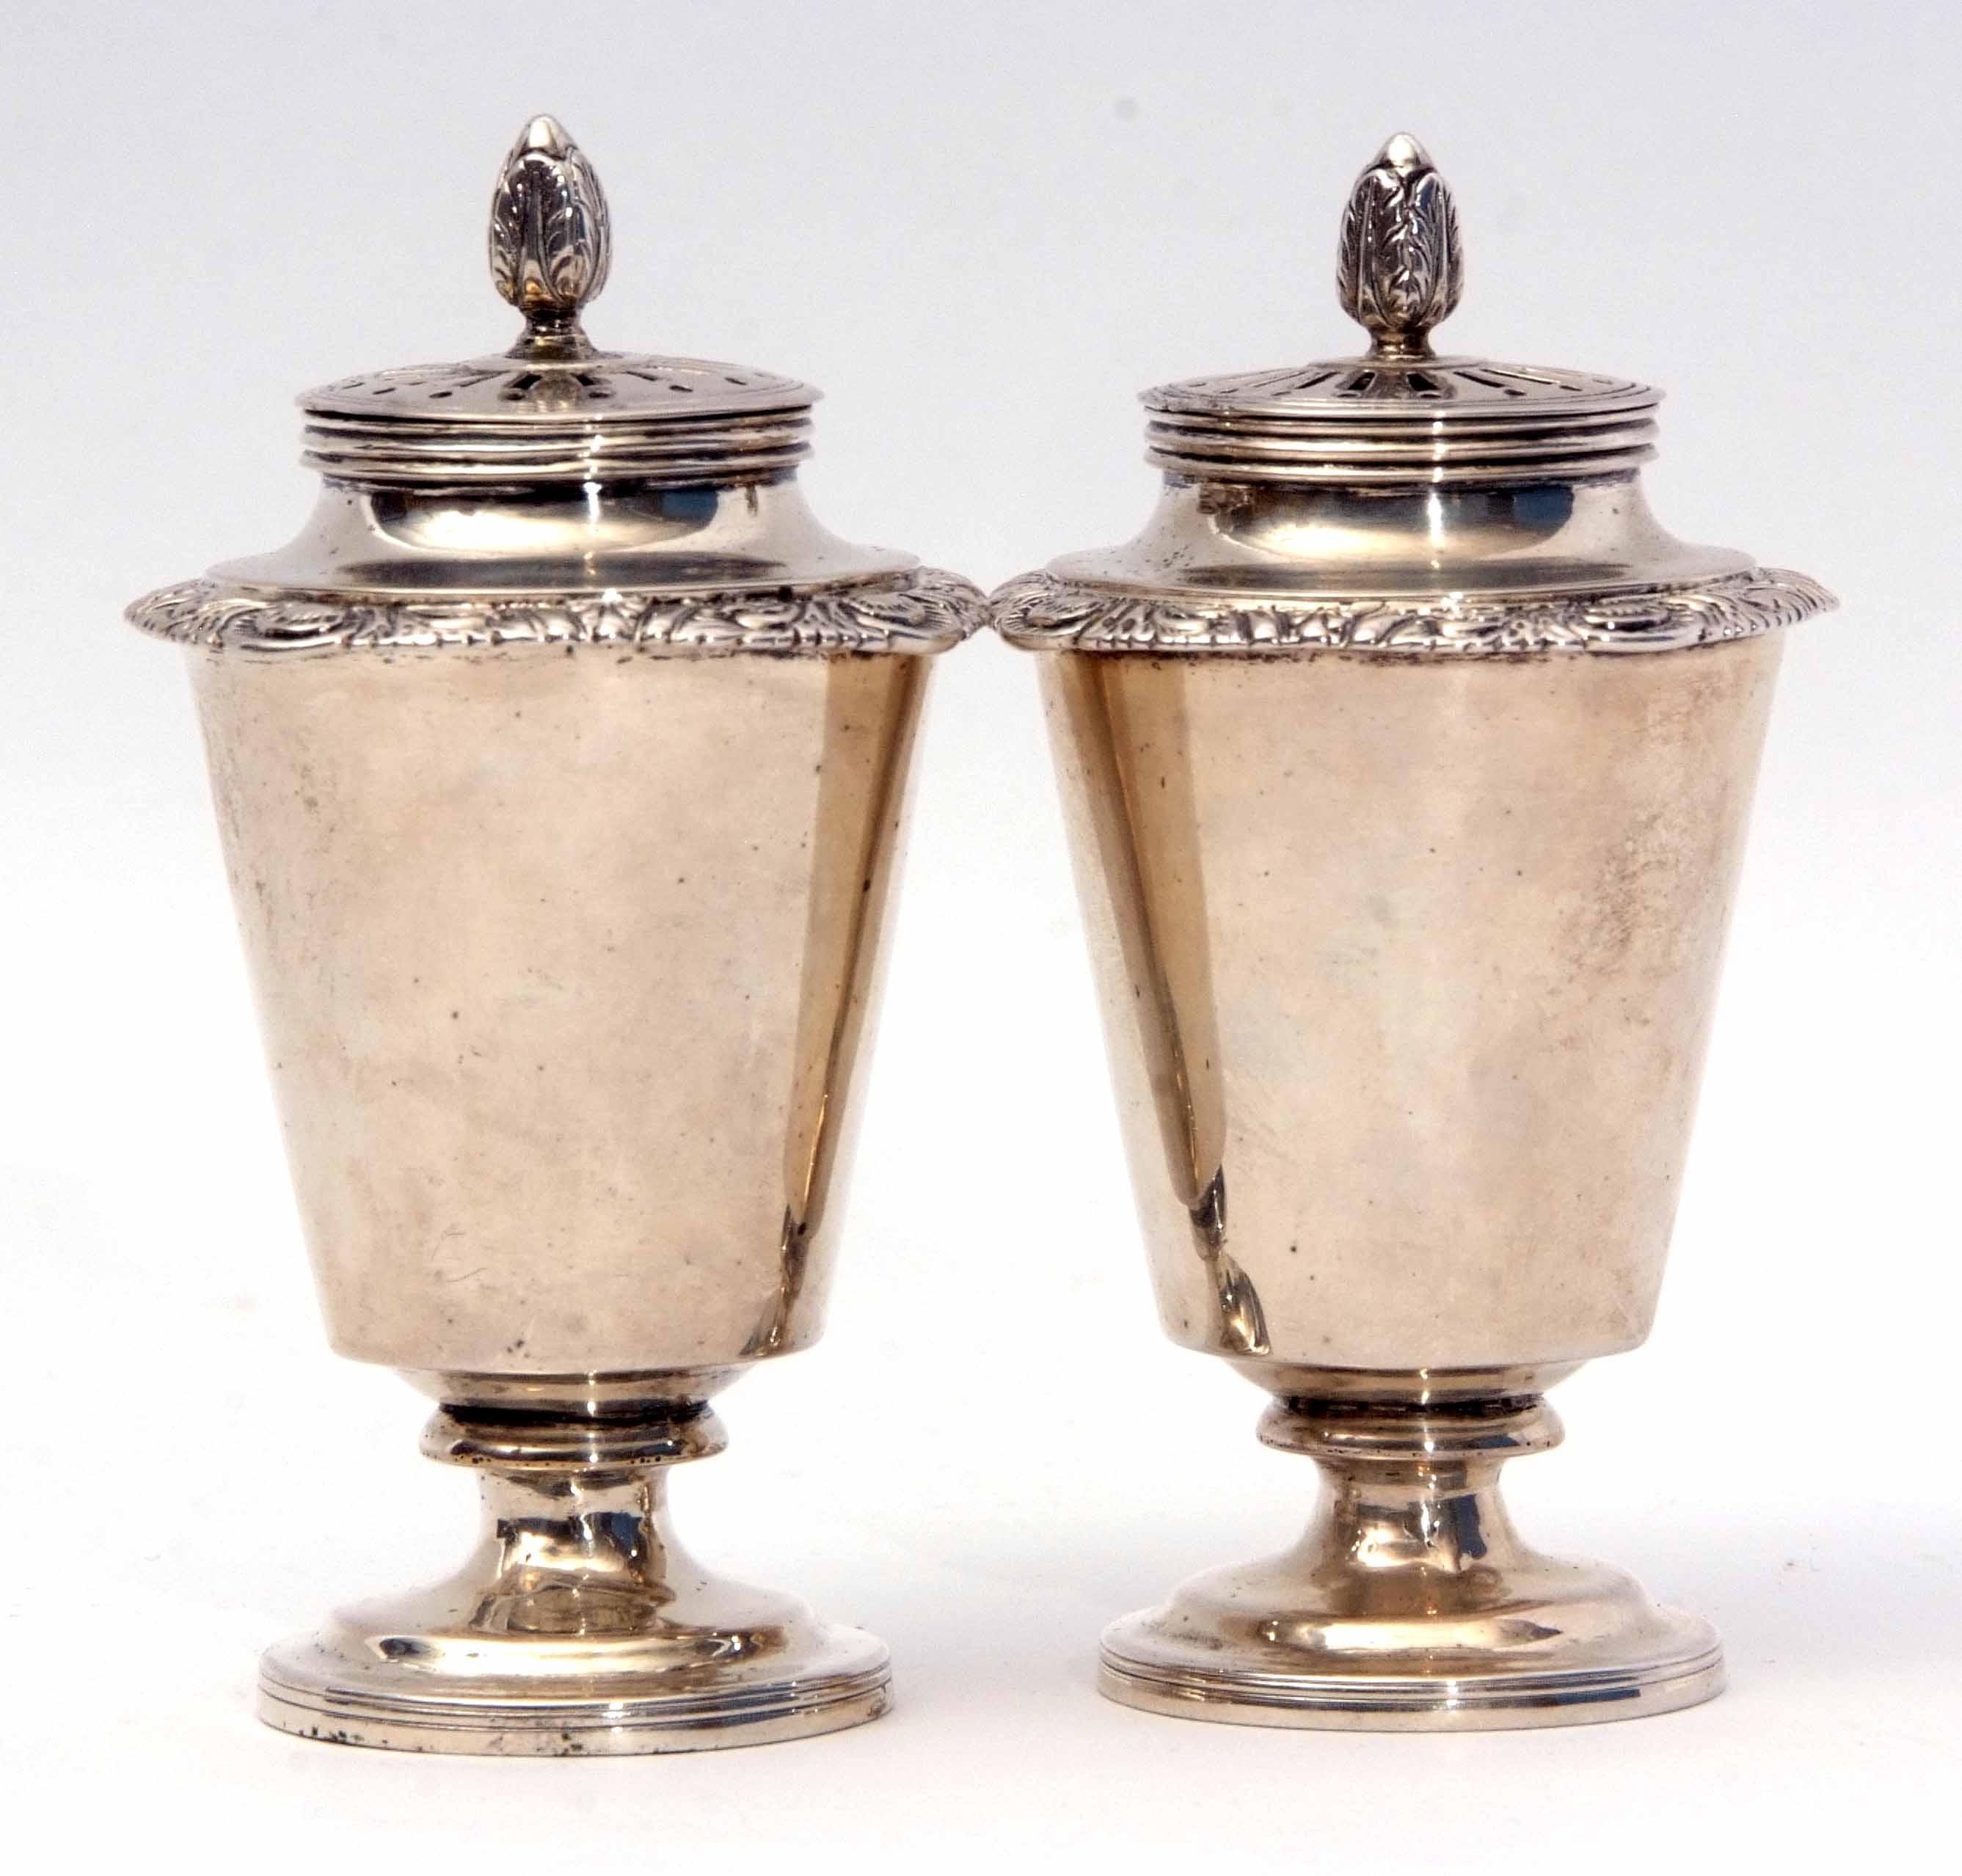 Two Indian colonial silver casters, each with pierced pull off covers and cast and applied finials - Image 3 of 4